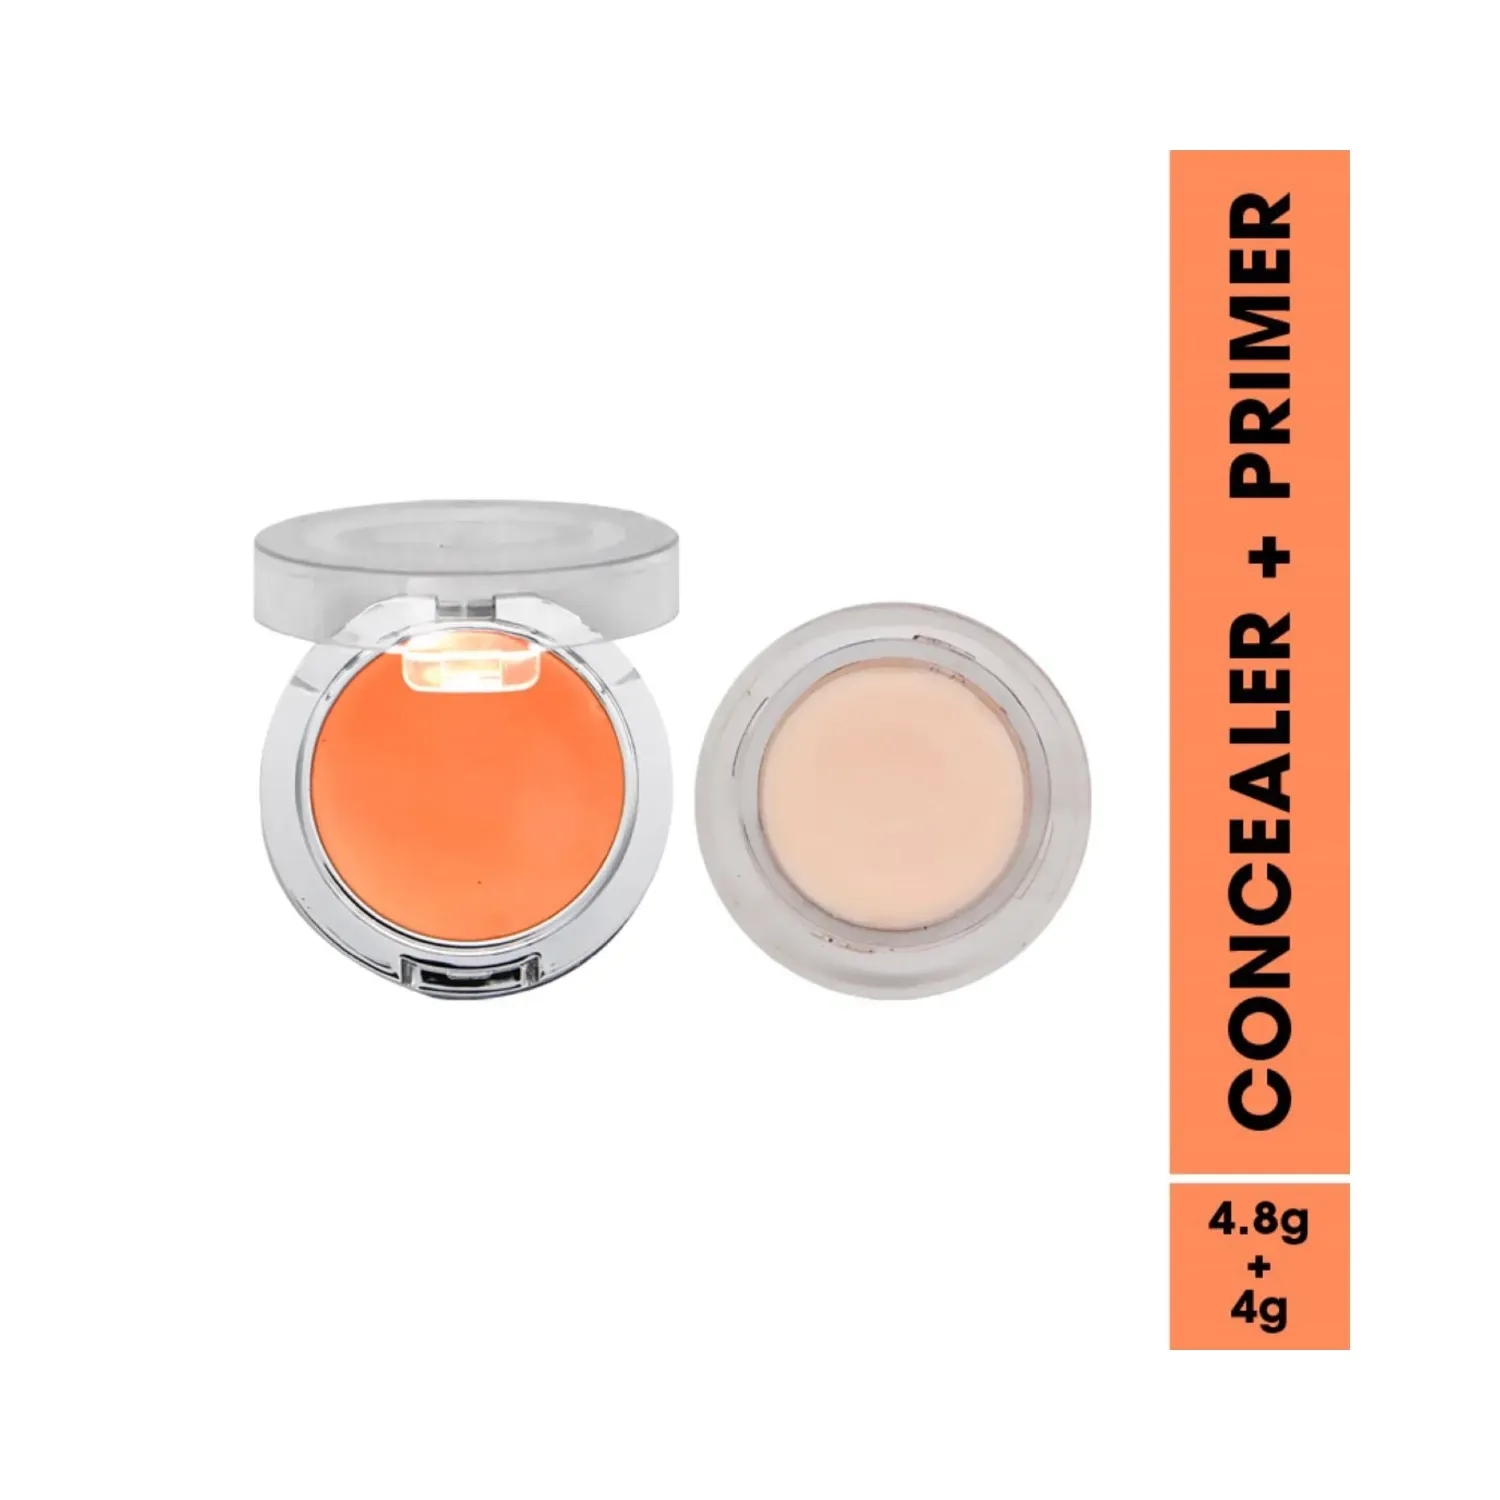 Fashion Colour | Fashion Colour 2-In-1 Primer And Concealer - 04 Shade (4.8g + 4g)